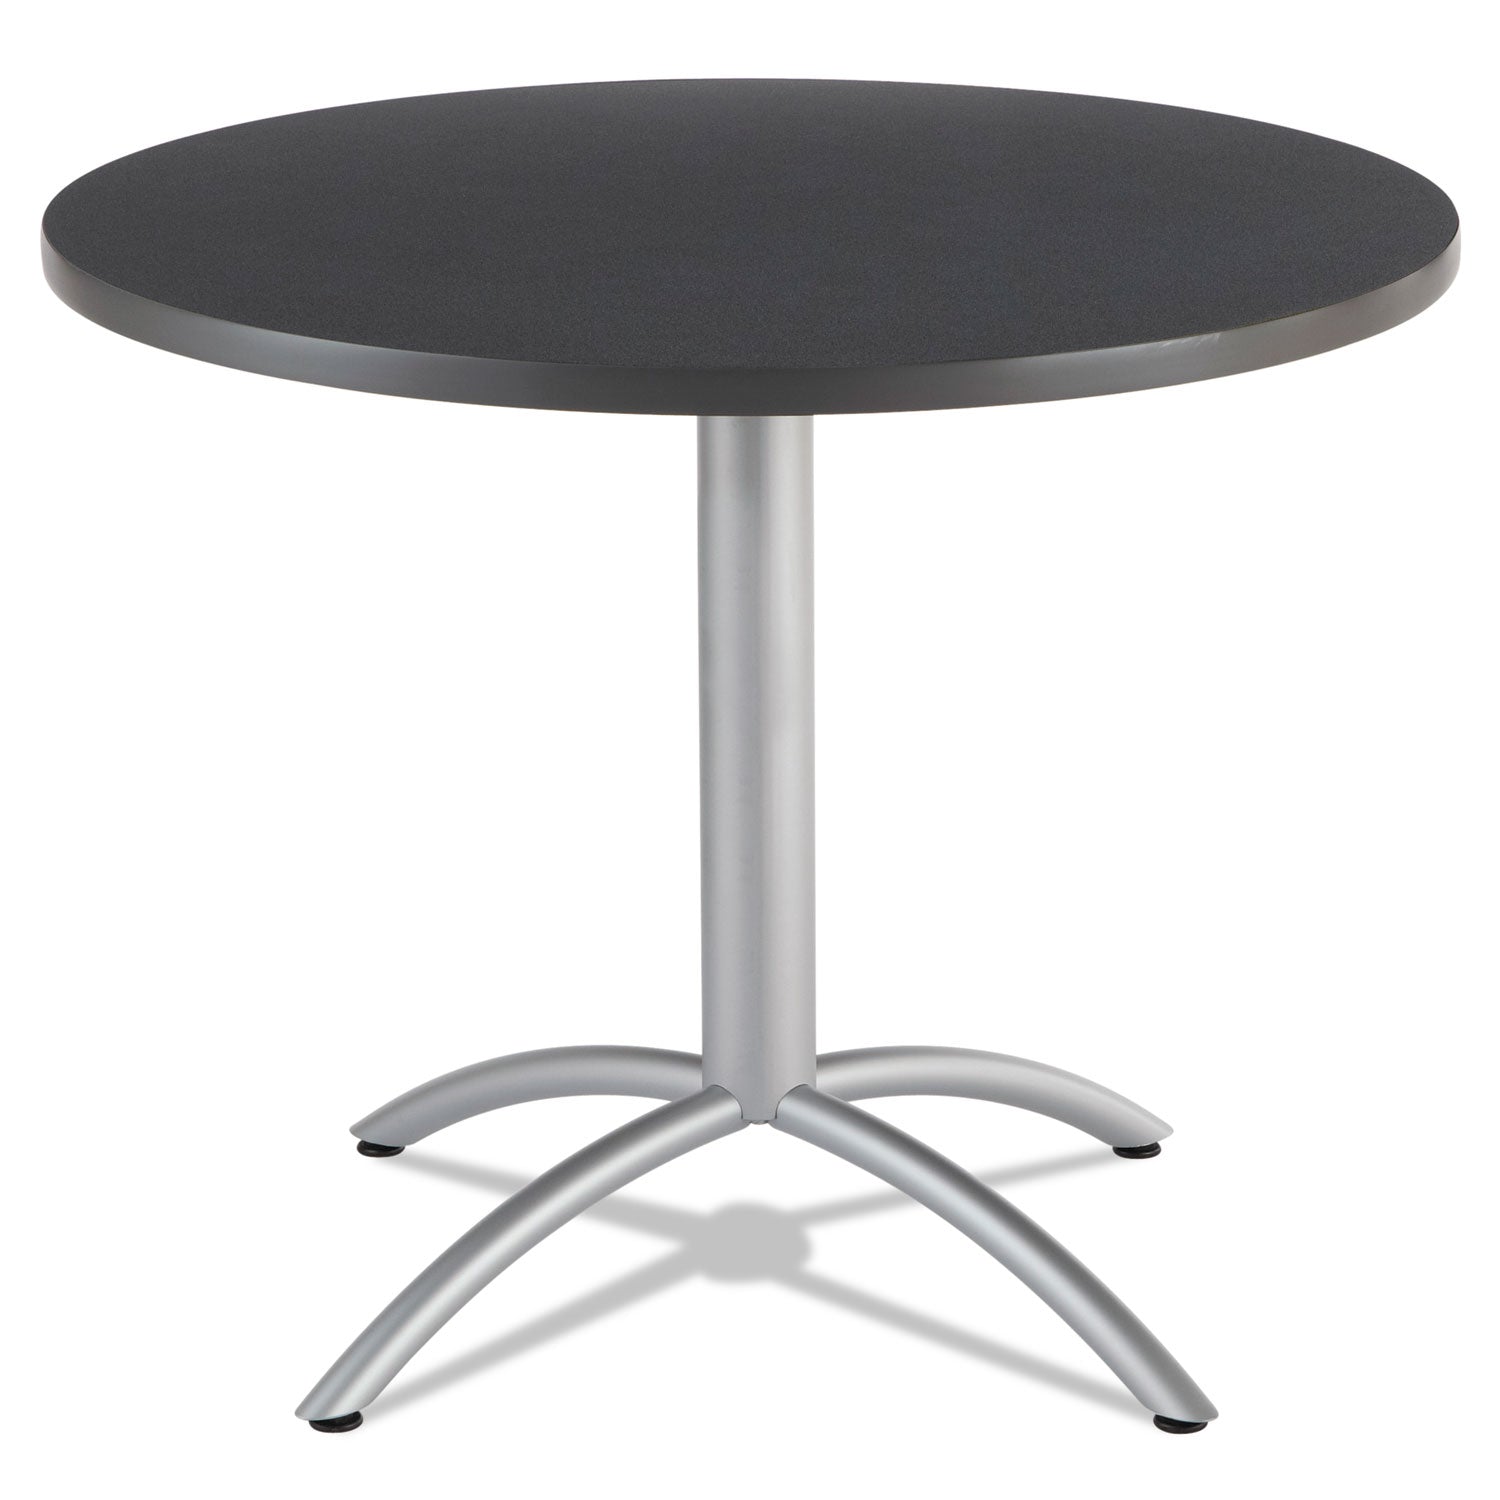 CafeWorks Table, Cafe-Height, Round, 36" x 30", Graphite Granite Top, Silver Base - 